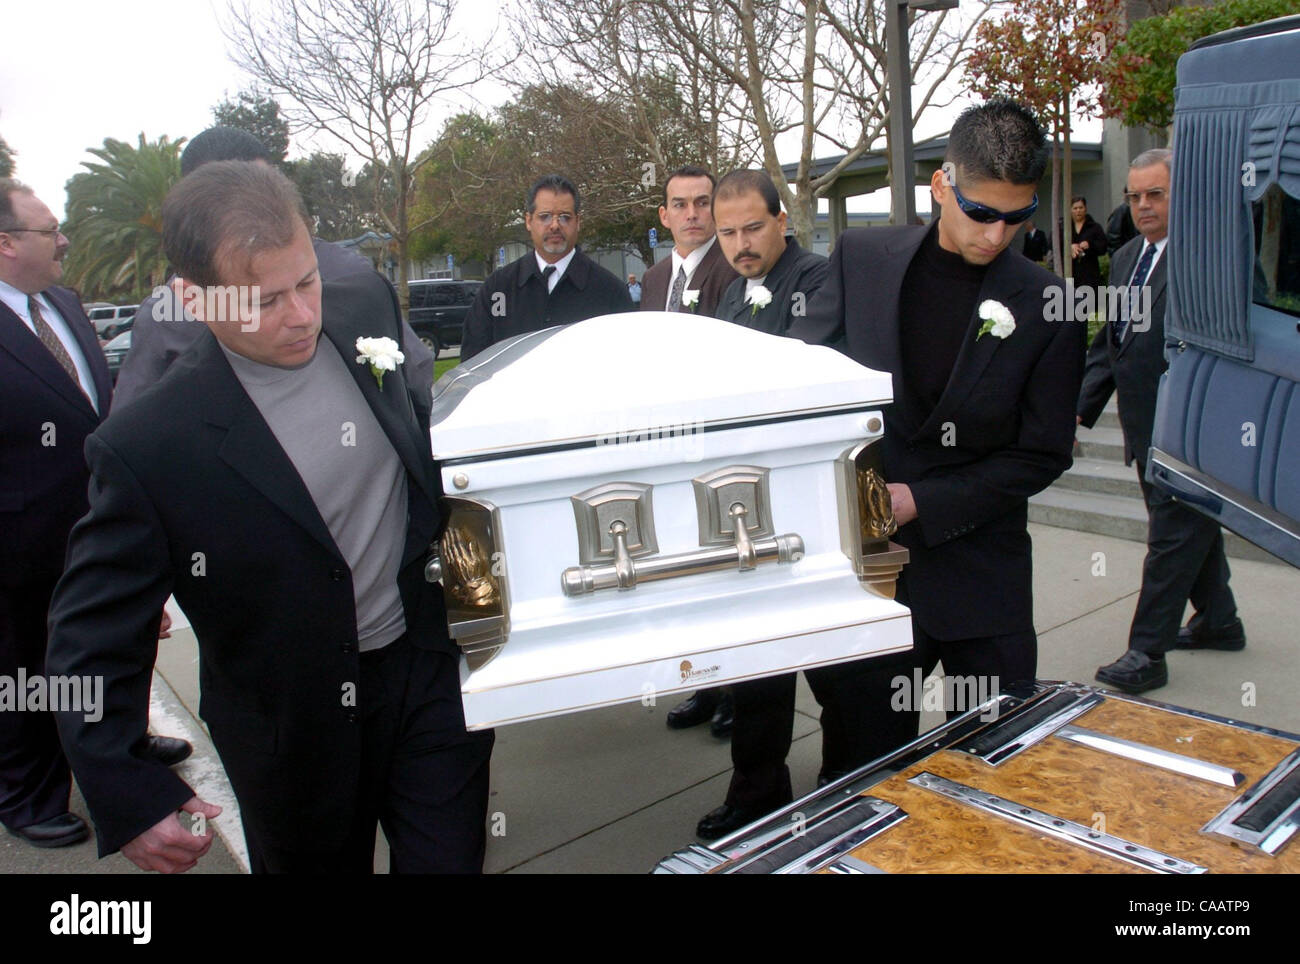 Family members including Manuel Pastor cq (left) Mary's nephew, of Orange County, and Mark Silva cq (right) Mary's godson, of Brentwood, load Mary Helen Armstrong's casket following  funeral services for Mary and her son Christopher at Church of the Good Shepard in Pittsburg, Calif. on Thursday, Jan Stock Photo